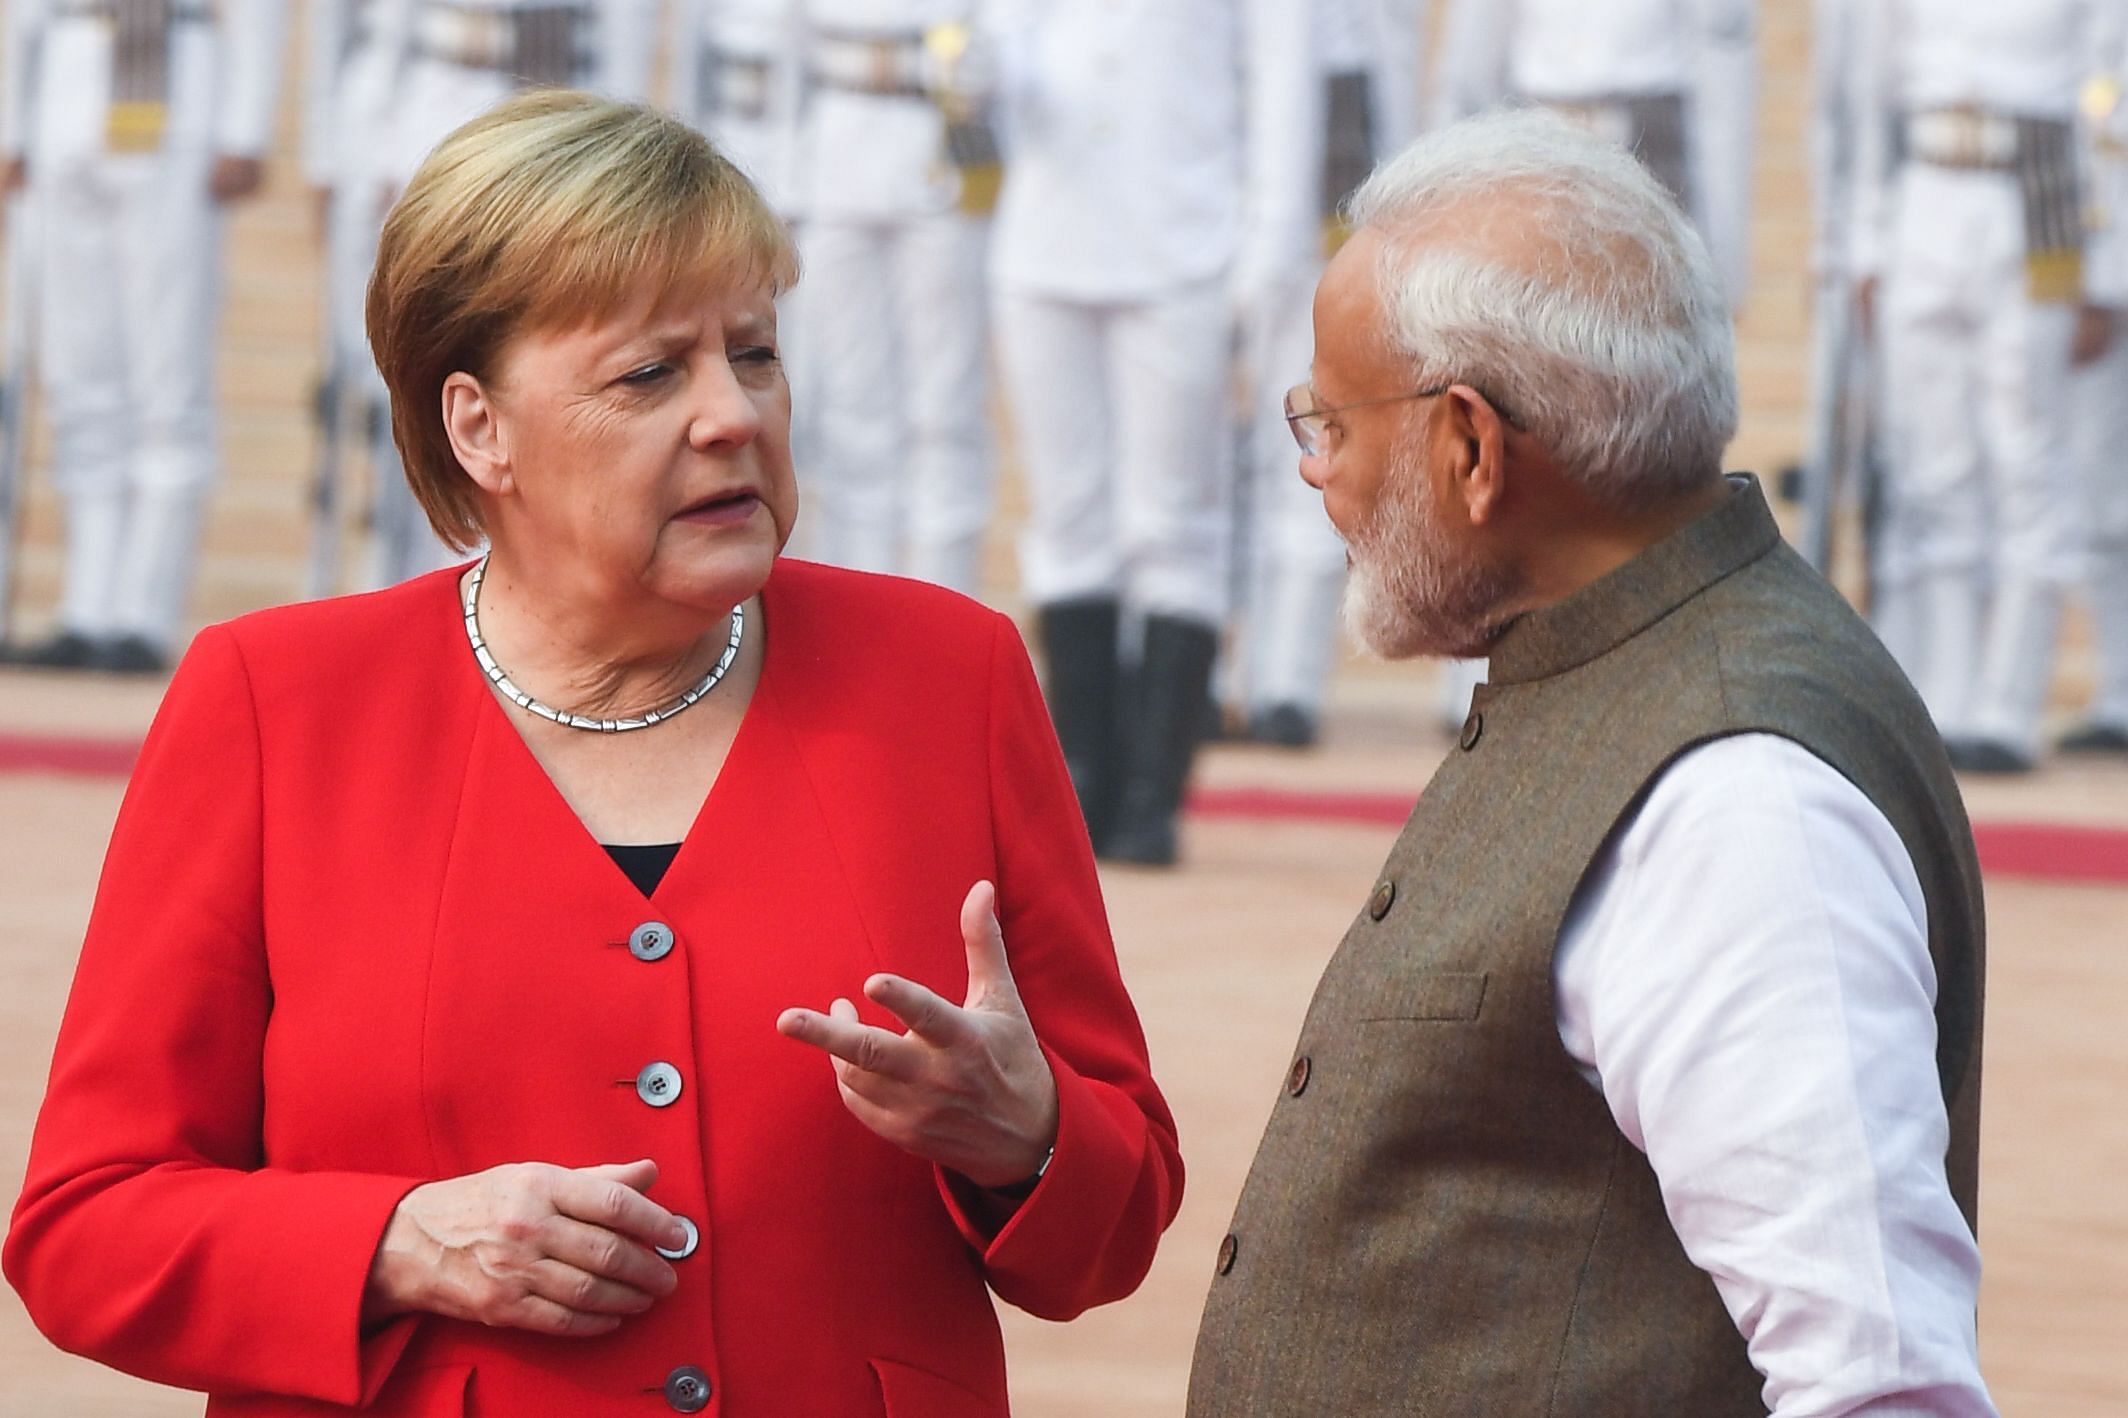 India's Prime Minister Narendra Modi (R) listens to German Chancellor Angela Merkel during a welcoming ceremony at Rashtrapati Bhavan. (AFP Photo)